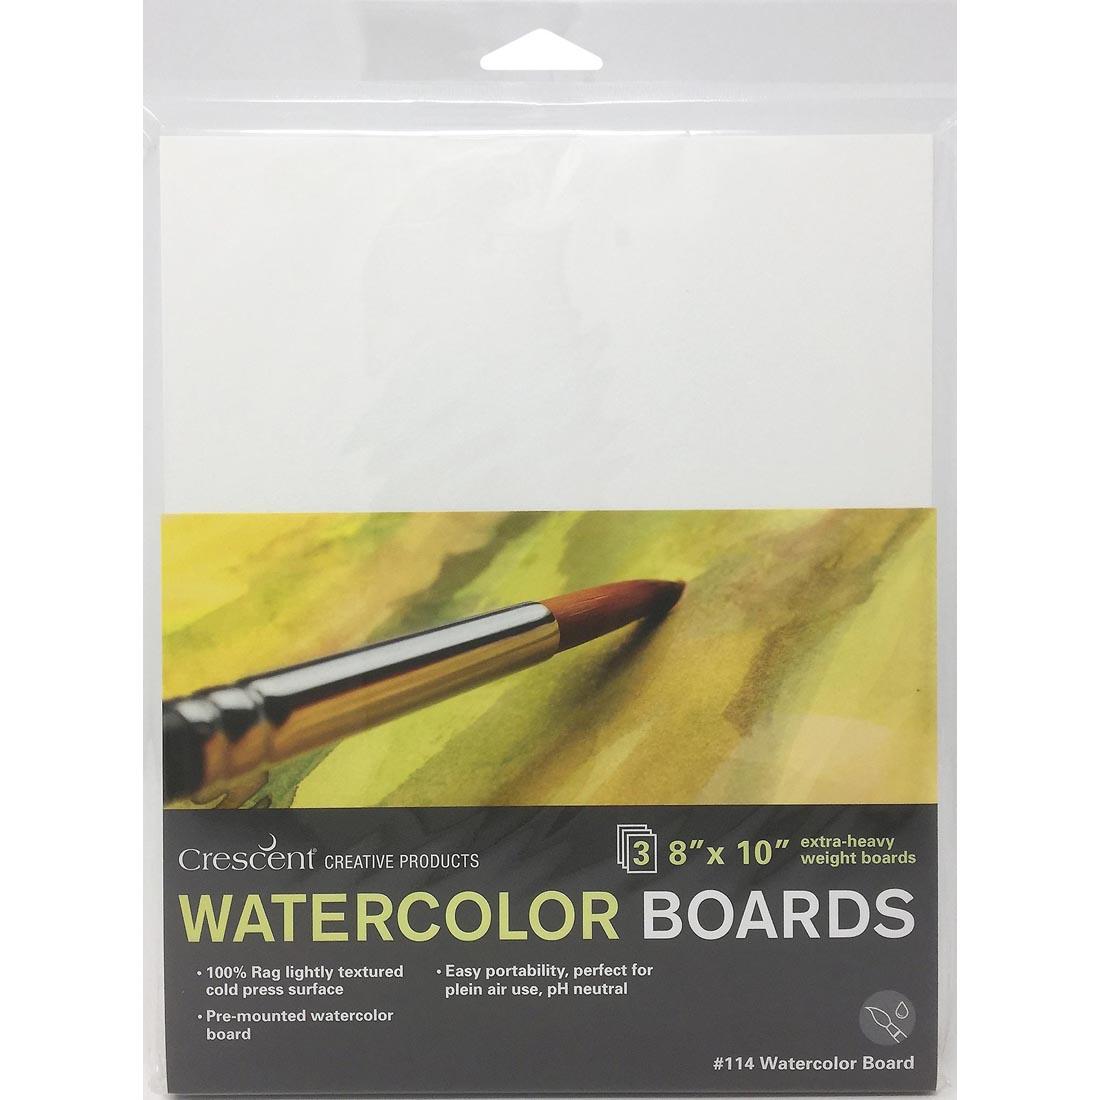 Package of Crescent #114 Watercolor Boards